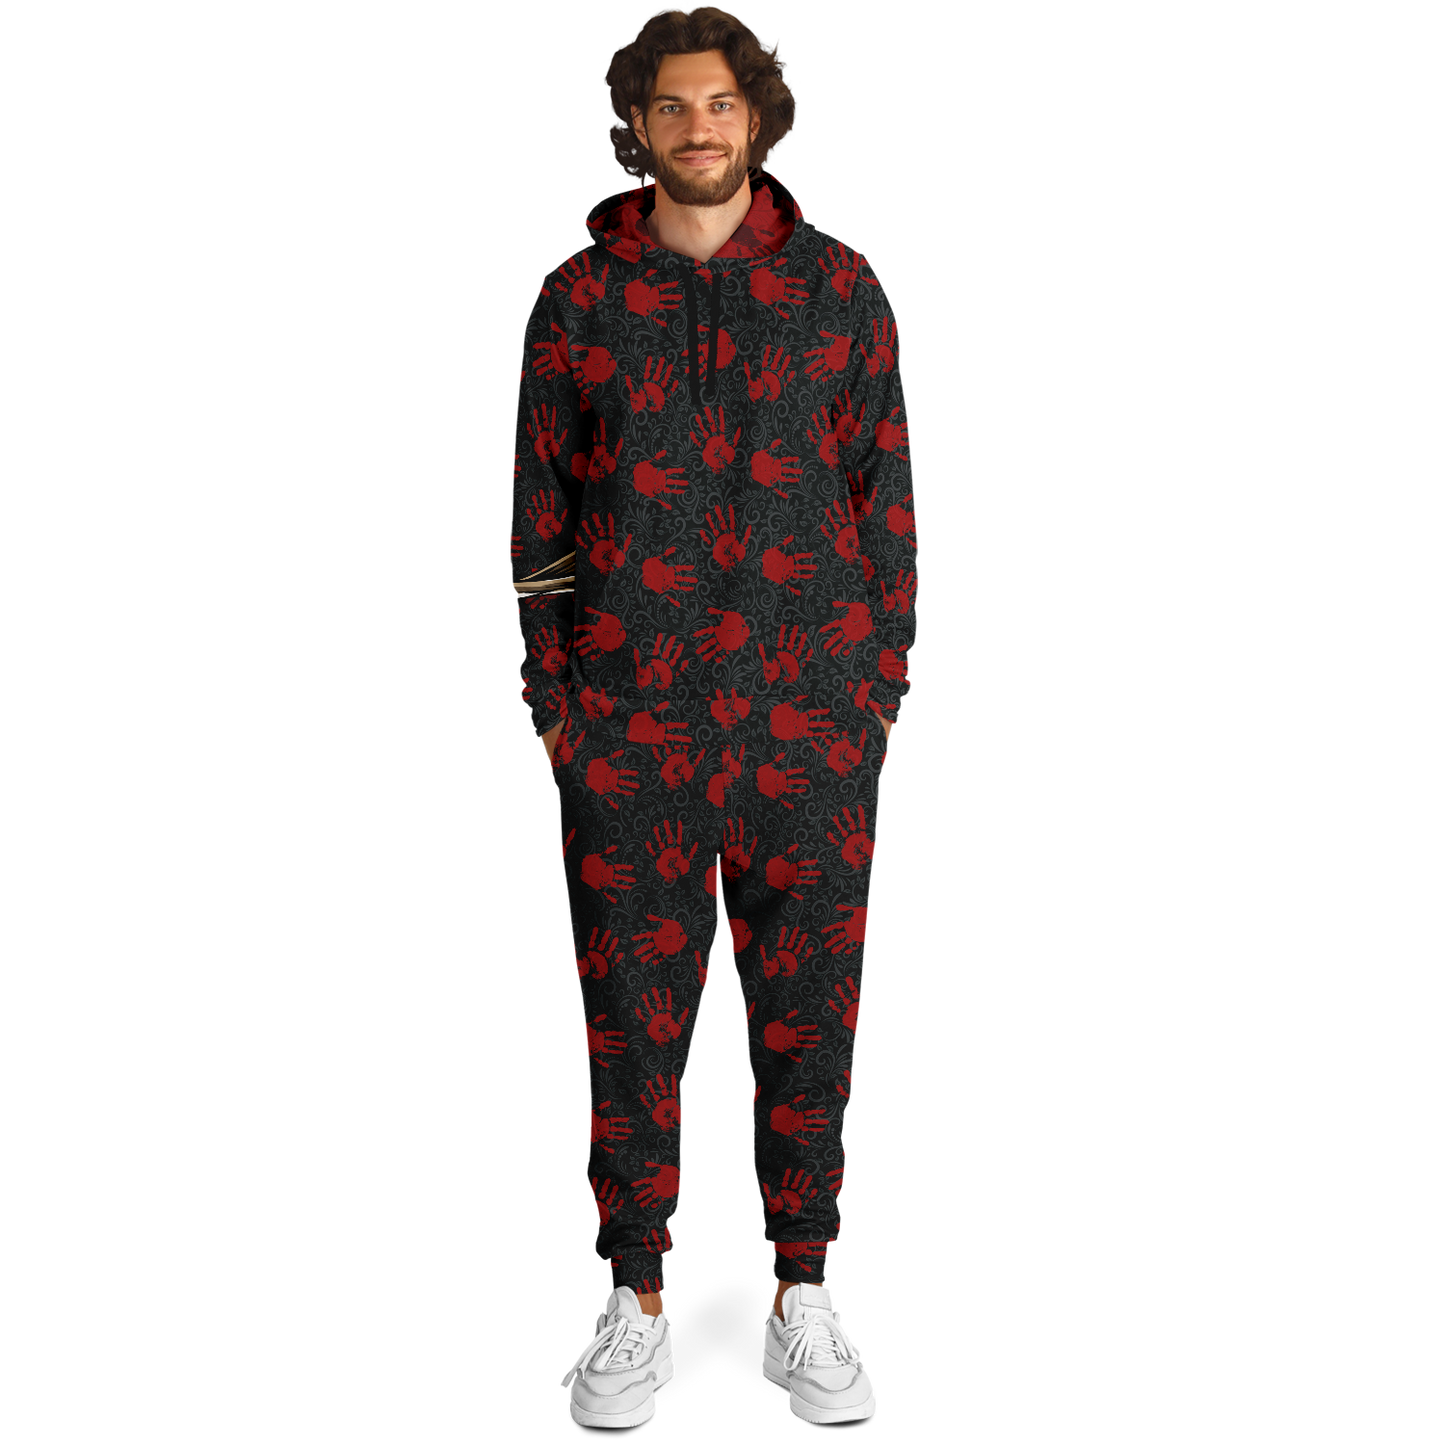 Mummy Horror Hoodie and jogger set